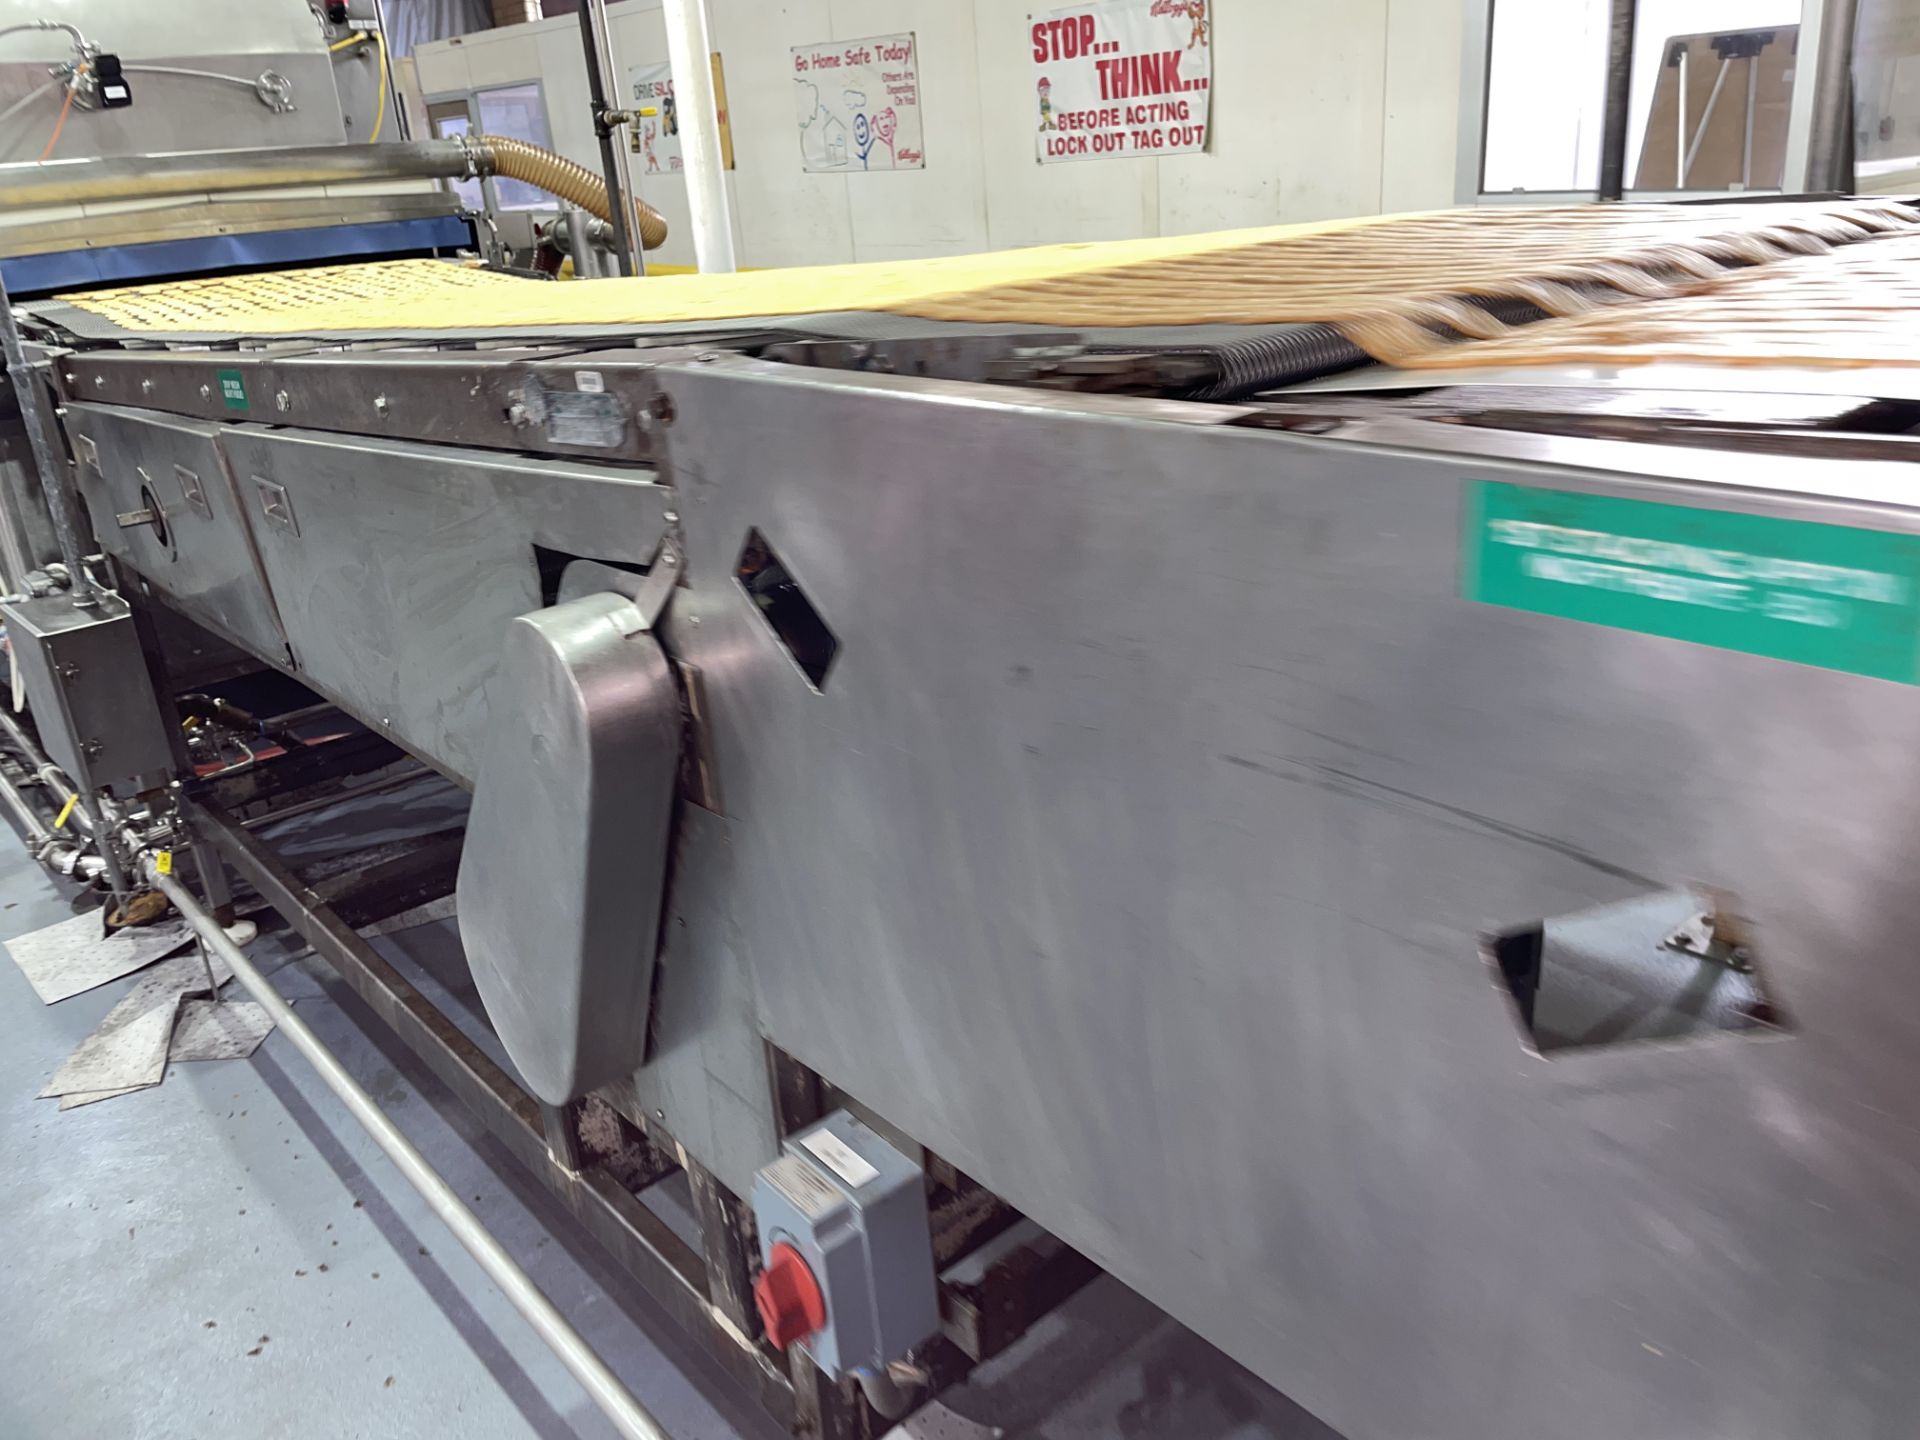 Discharge Conveyor From Oven, Loading Fee: $3500 - Late Delivery April 2022